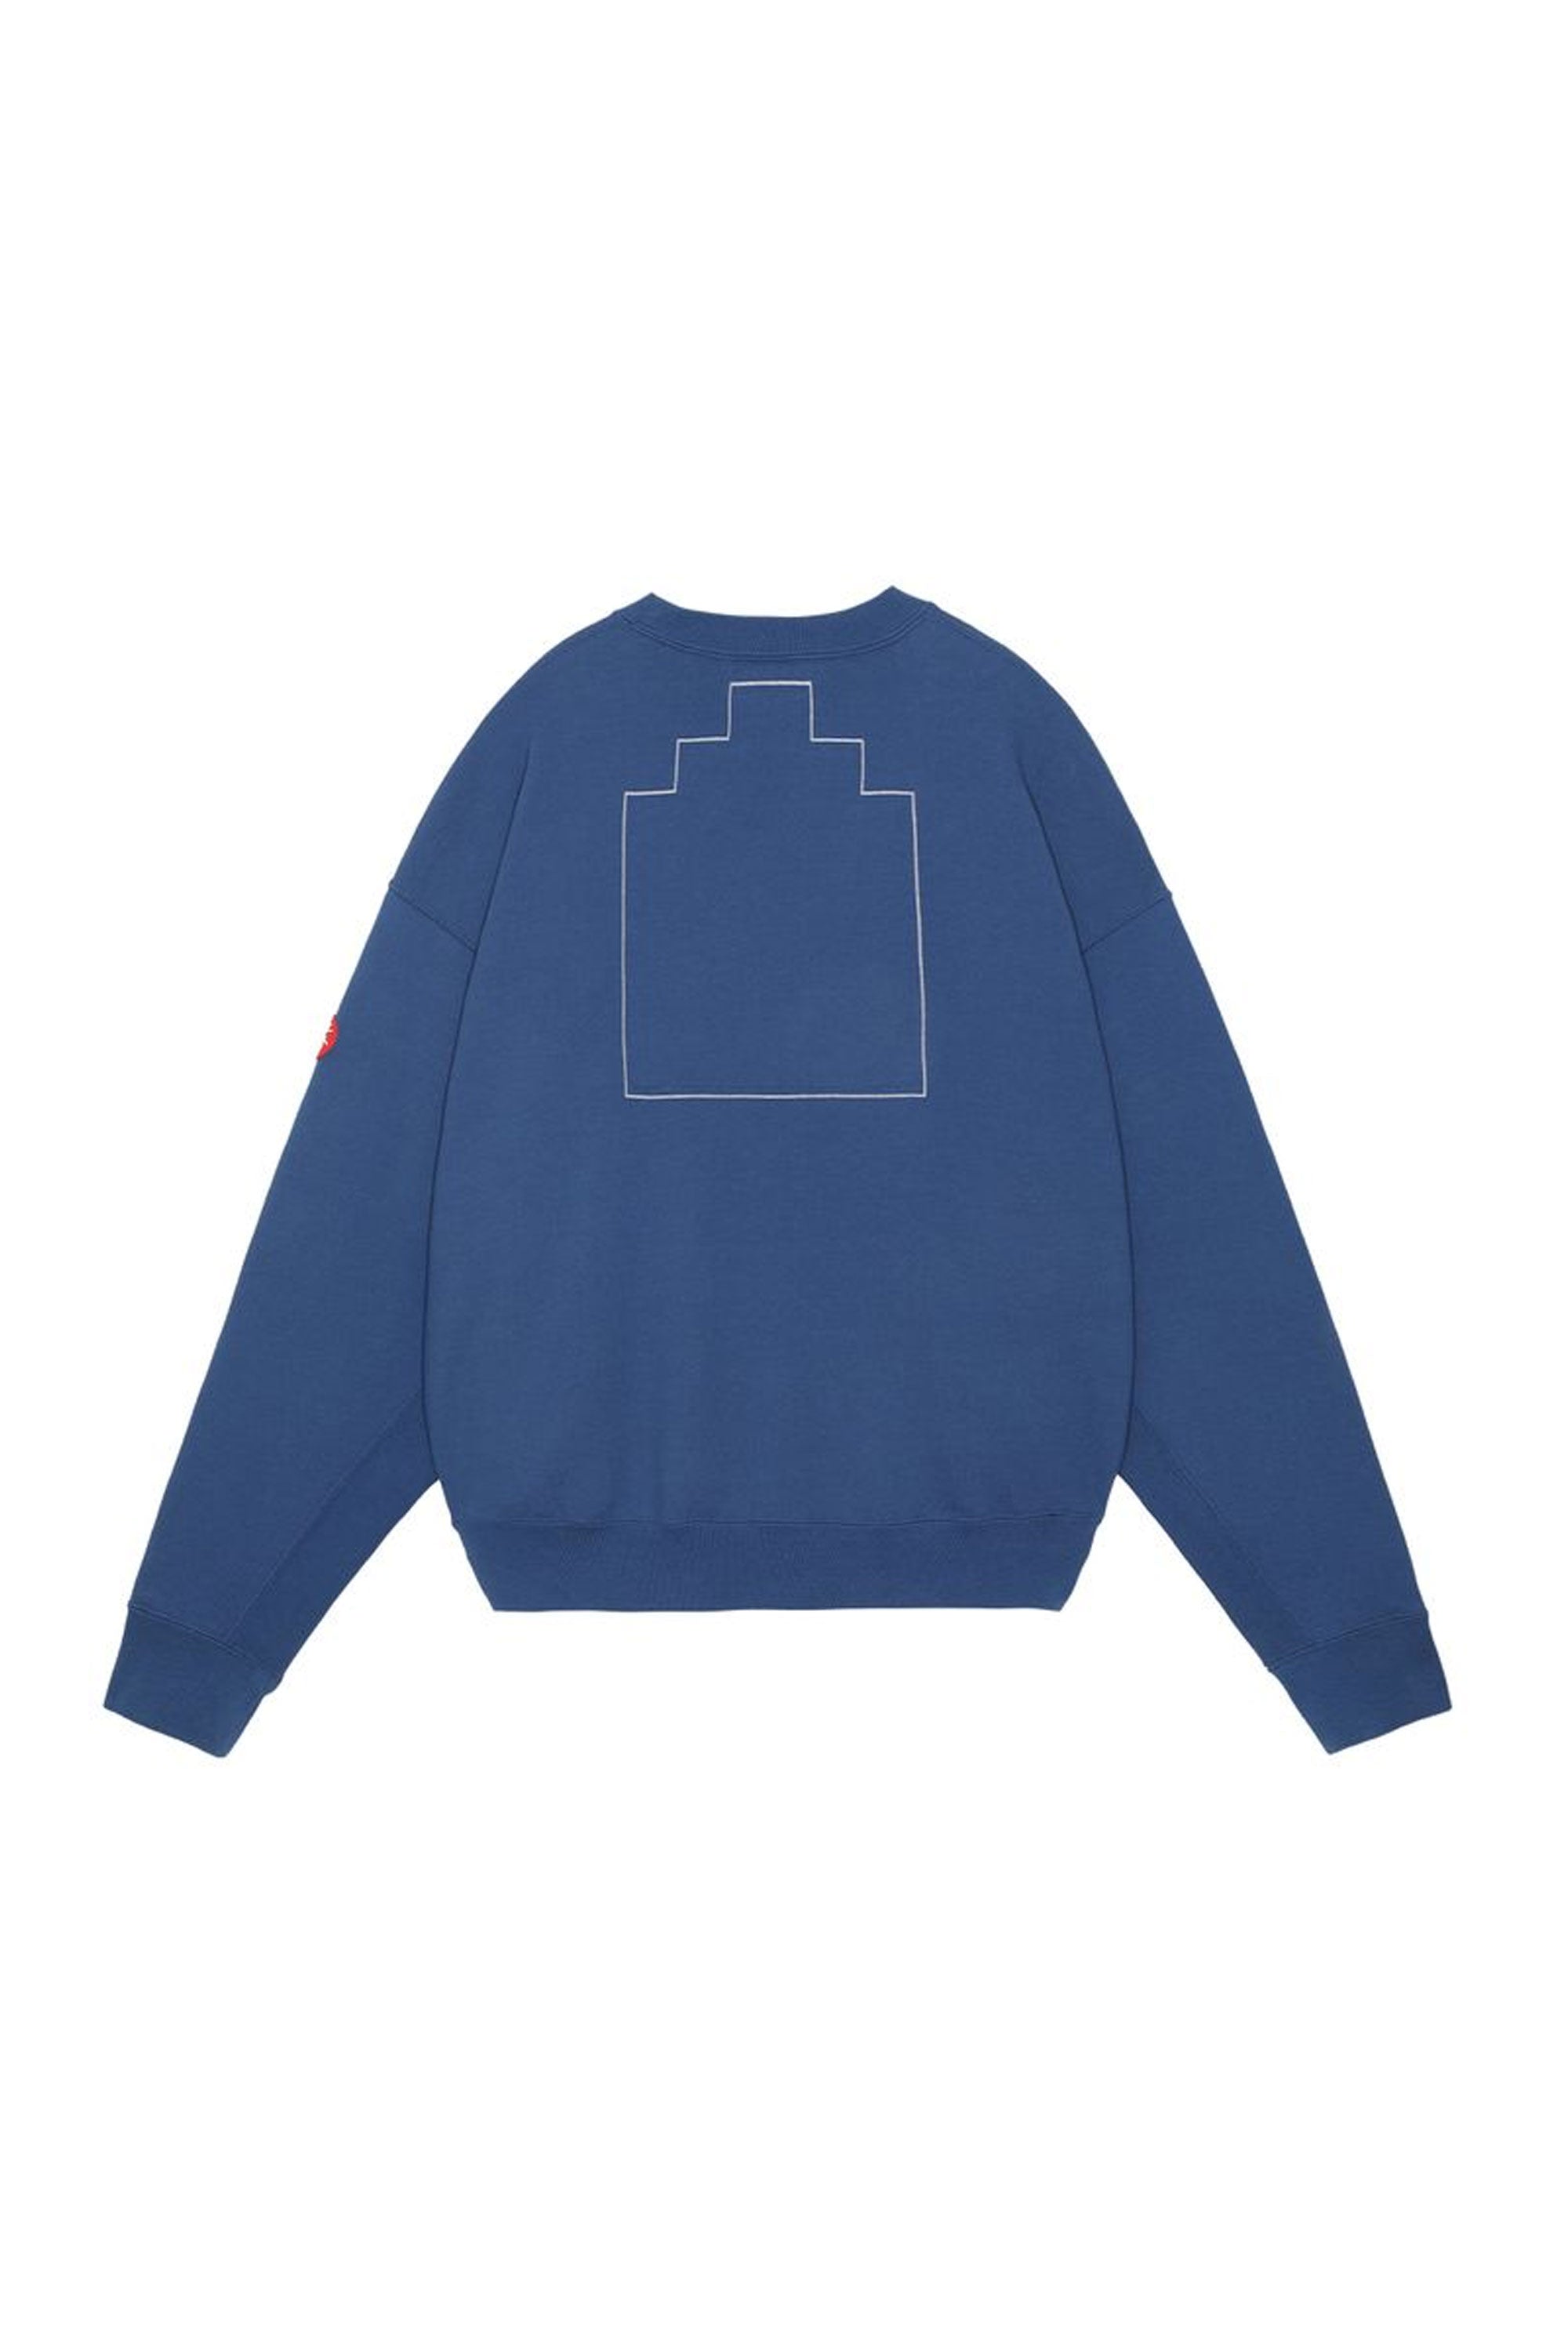 The CAV EMPT - !@#$%" CREW NECK  available online with global shipping, and in PAM Stores Melbourne and Sydney.